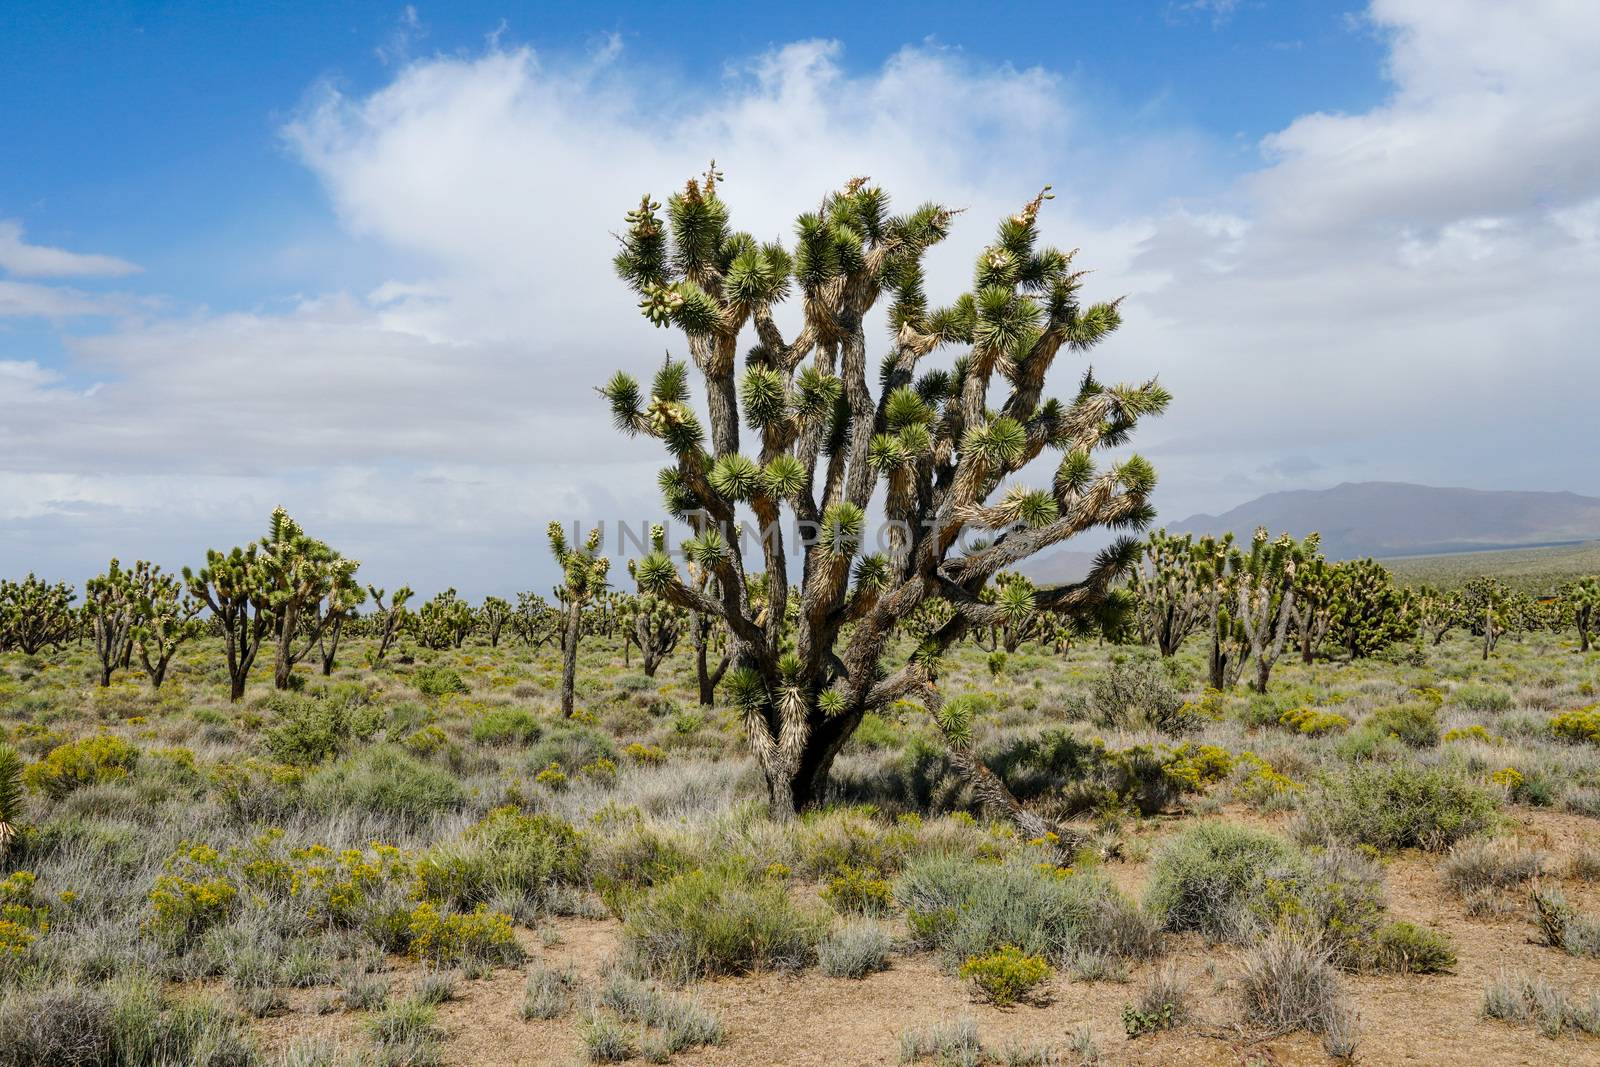 Joshua Tree National Park. American desert national park in southeastern California. Yucca brevifolia, Joshua Tree is a plant species belonging to the genus Yucca.